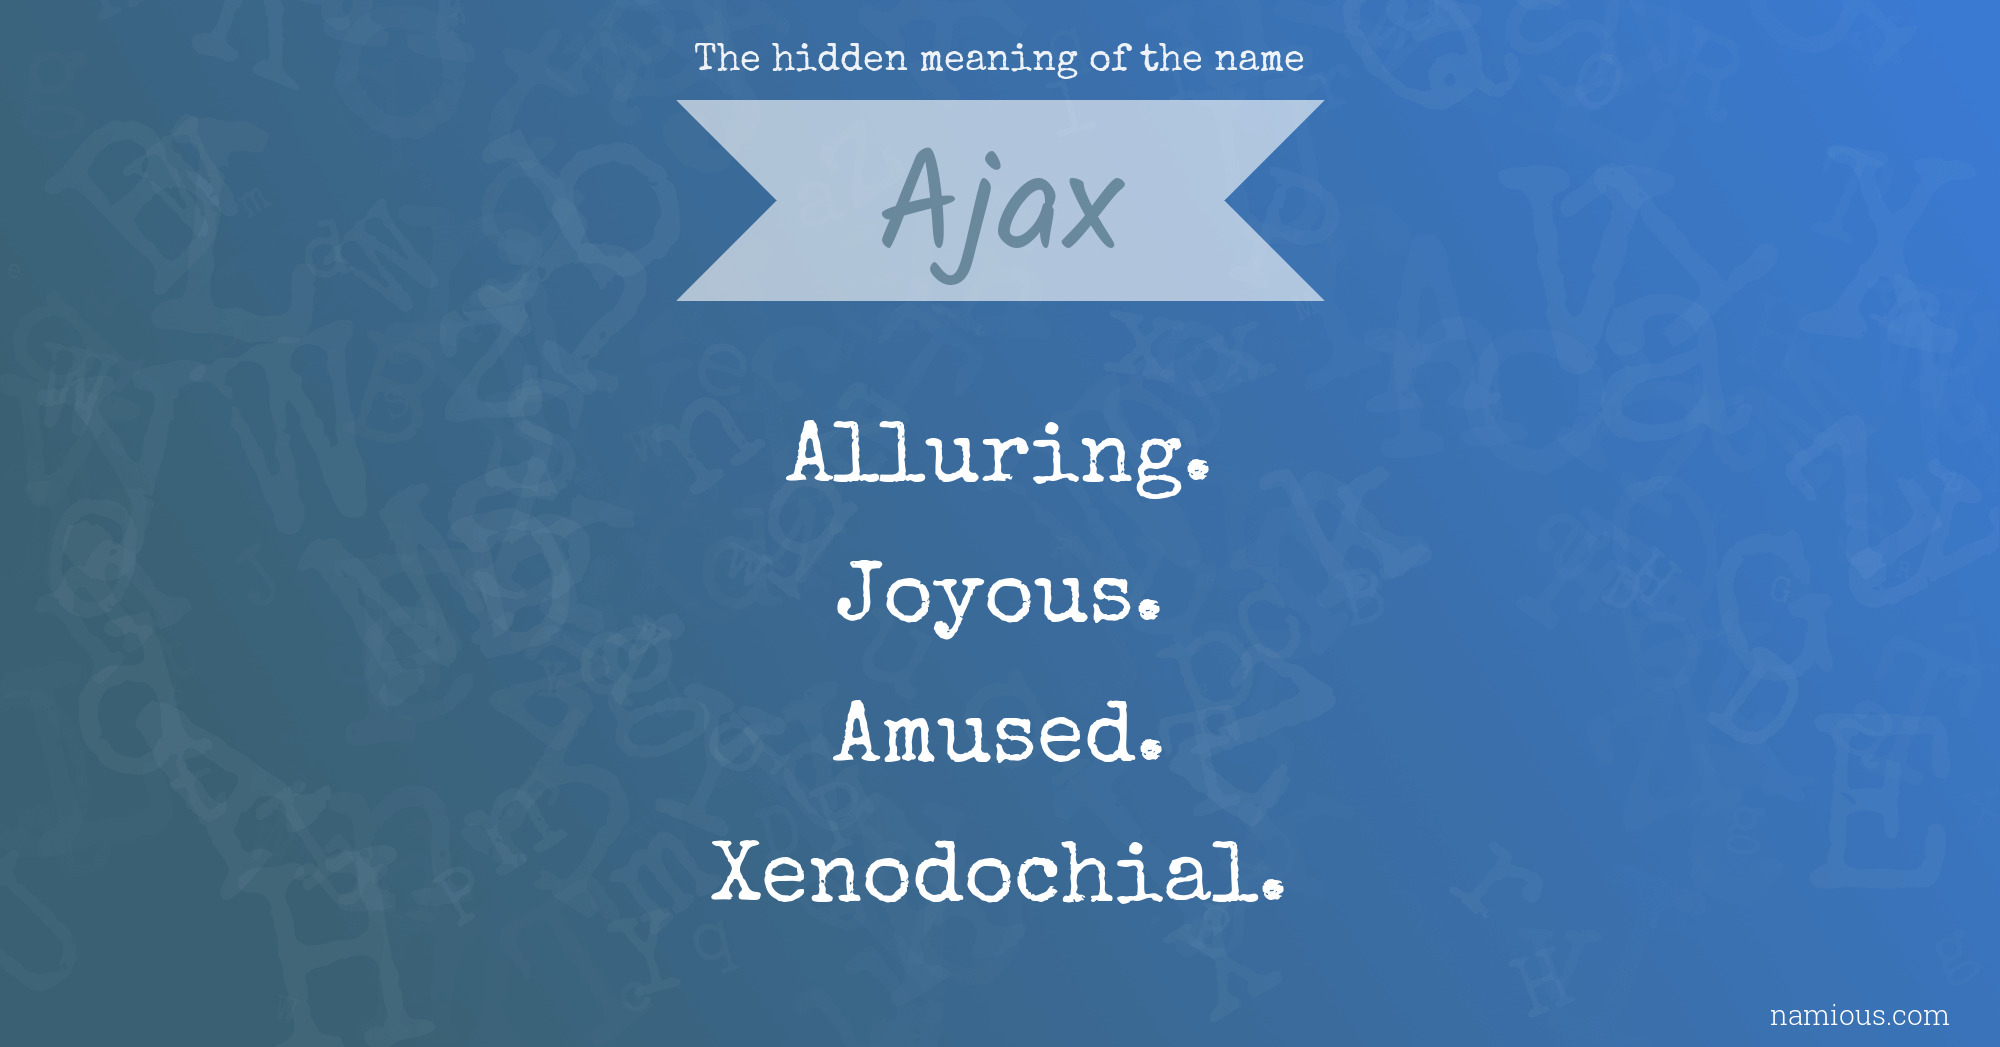 The hidden meaning of the name Ajax